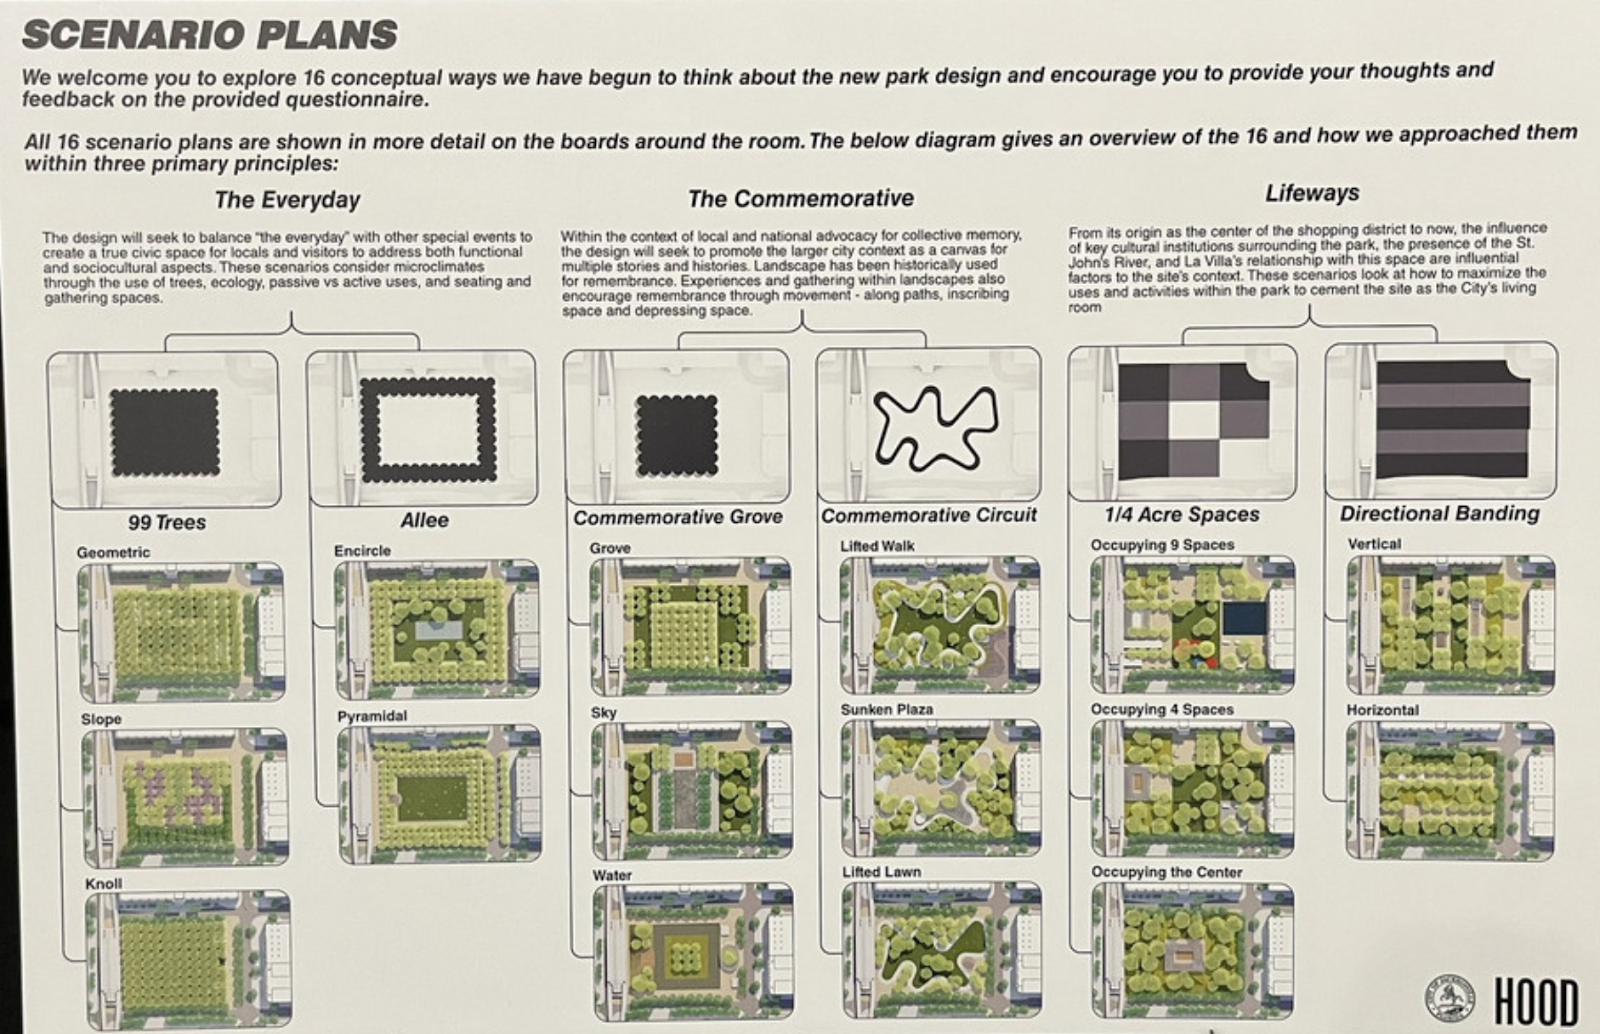 A poster of a park plan

Description automatically generated with medium confidence